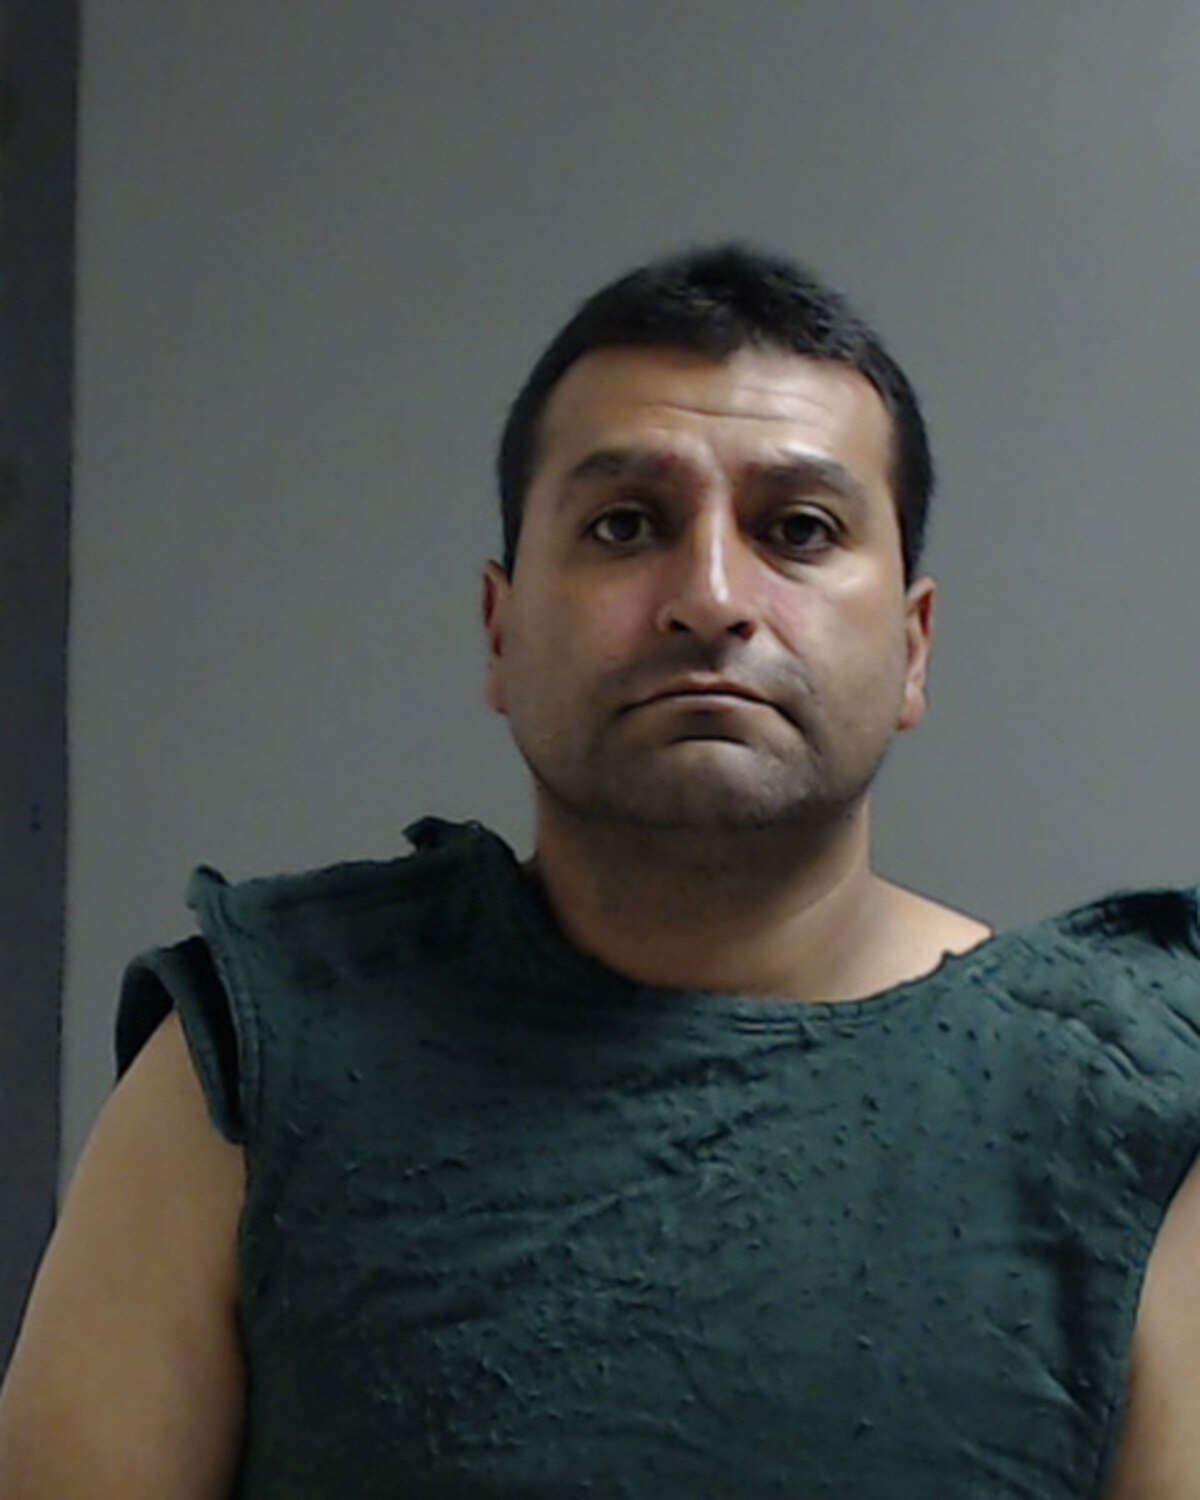 Ricardo Zavala, 37, was arrested Feb. 22, 2017 in Hidalgo County and charged with aggravated robbery, unlawful possession of a firearm by a felon, possession of marijuana and possession of a controlled substance, according to county jail records.